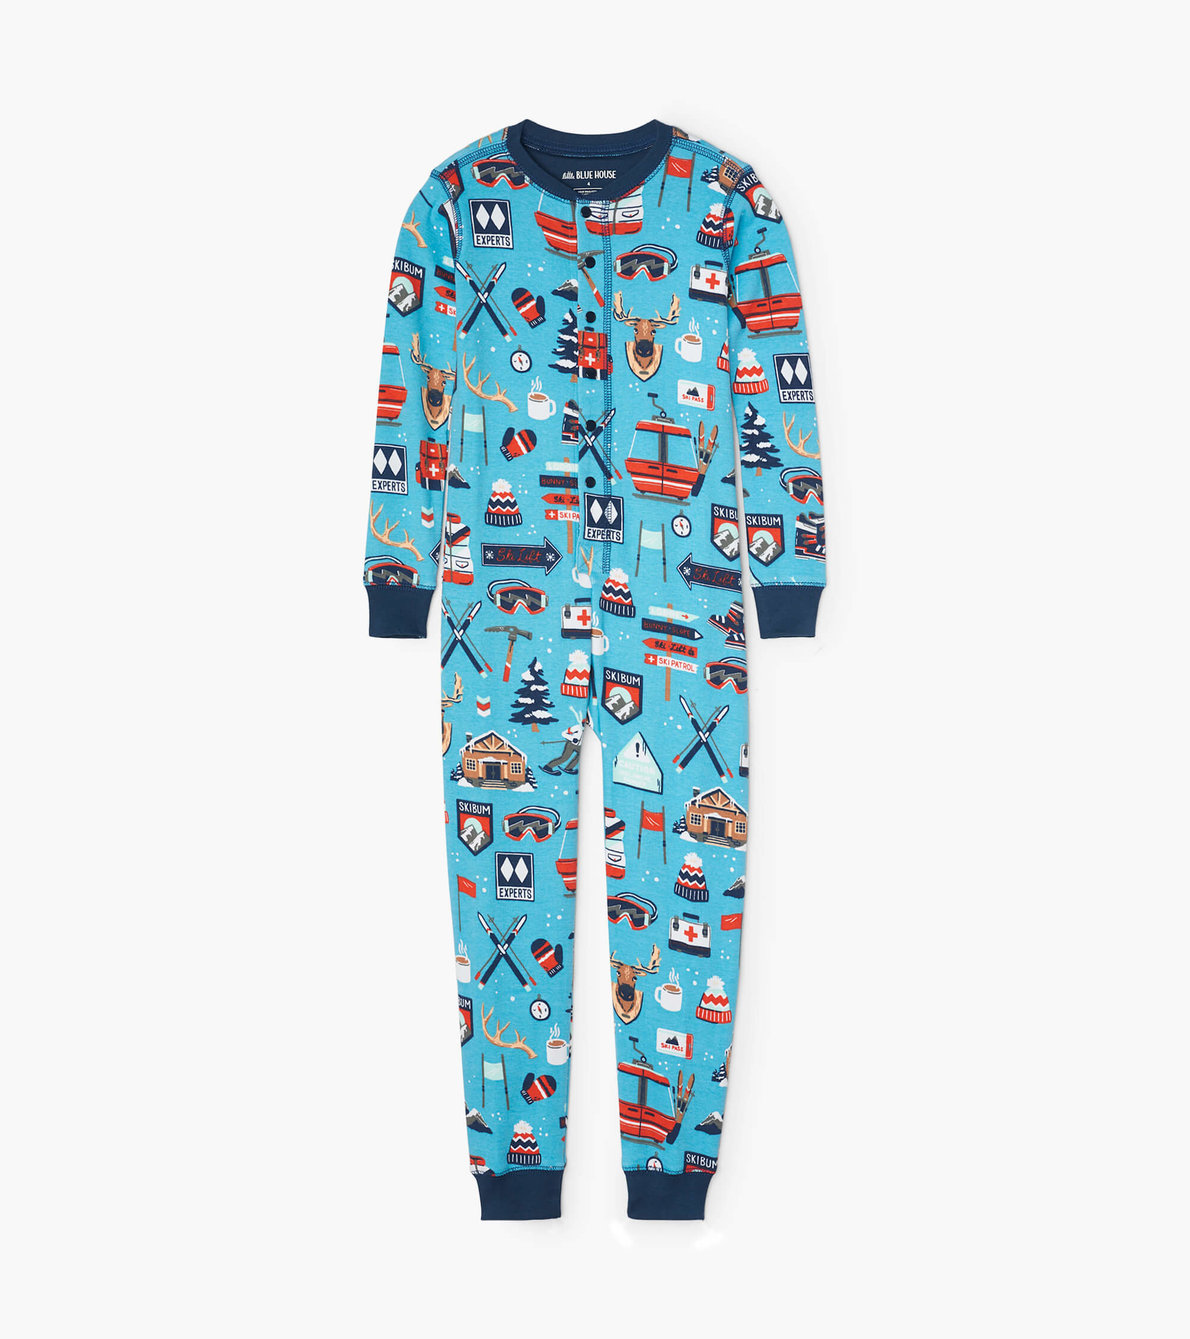 View larger image of Ski Holiday Kids Union Suit